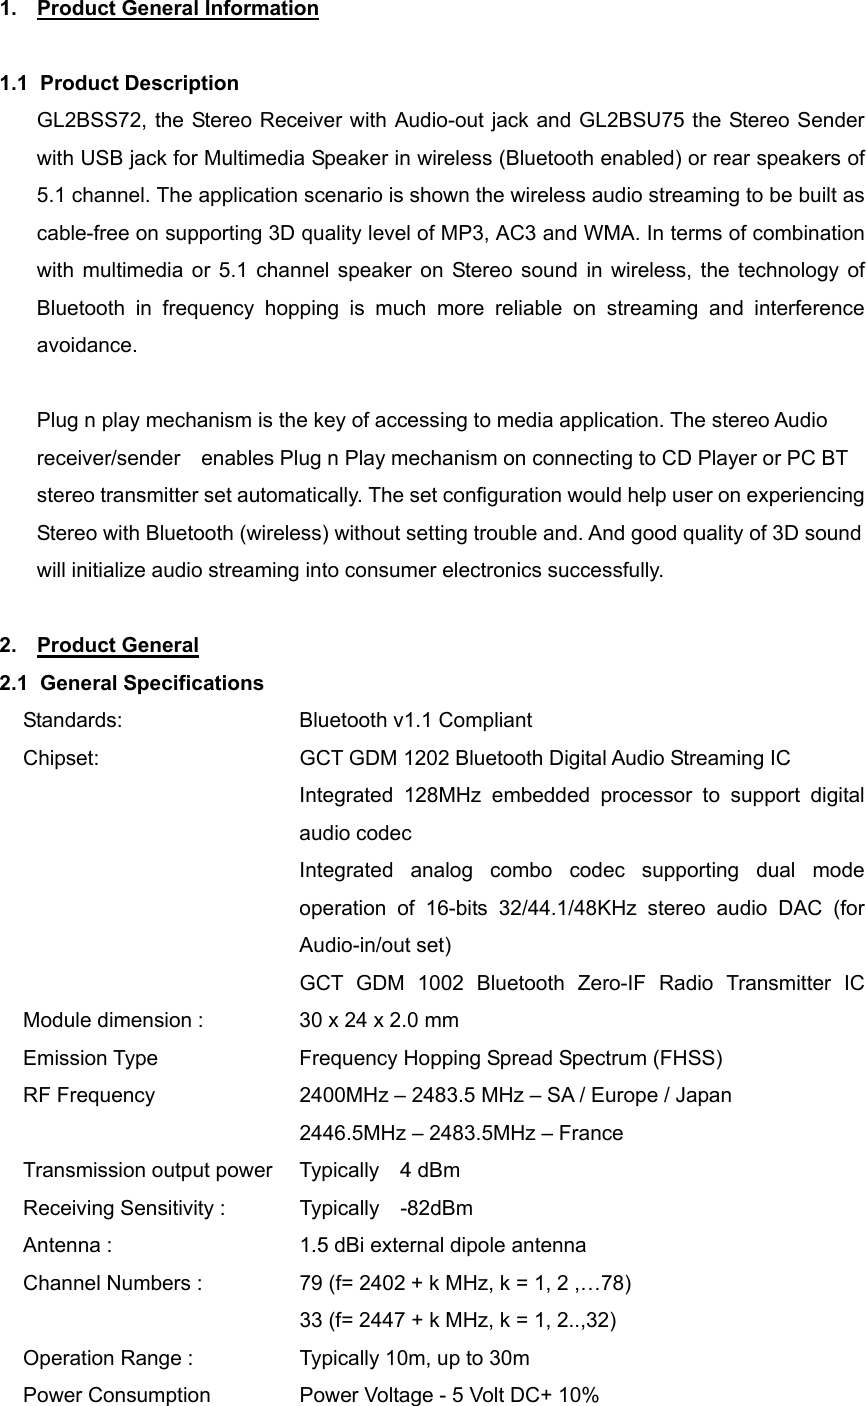 1.  Product General Information  1.1 Product Description GL2BSS72, the Stereo Receiver with Audio-out jack and GL2BSU75 the Stereo Sender with USB jack for Multimedia Speaker in wireless (Bluetooth enabled) or rear speakers of 5.1 channel. The application scenario is shown the wireless audio streaming to be built as cable-free on supporting 3D quality level of MP3, AC3 and WMA. In terms of combination with multimedia or 5.1 channel speaker on Stereo sound in wireless, the technology of Bluetooth in frequency hopping is much more reliable on streaming and interference avoidance.   Plug n play mechanism is the key of accessing to media application. The stereo Audio receiver/sender    enables Plug n Play mechanism on connecting to CD Player or PC BT stereo transmitter set automatically. The set configuration would help user on experiencing Stereo with Bluetooth (wireless) without setting trouble and. And good quality of 3D sound will initialize audio streaming into consumer electronics successfully.  2. Product General 2.1 General Specifications Standards:    Bluetooth v1.1 Compliant Chipset:                GCT GDM 1202 Bluetooth Digital Audio Streaming IC Integrated 128MHz embedded processor to support digital audio codec Integrated analog combo codec supporting dual mode operation of 16-bits 32/44.1/48KHz stereo audio DAC (for Audio-in/out set)                          GCT GDM 1002  Bluetooth Zero-IF  Radio  Transmitter  IC            Module dimension :            30 x 24 x 2.0 mm   Emission Type      Frequency Hopping Spread Spectrum (FHSS) RF Frequency      2400MHz – 2483.5 MHz – SA / Europe / Japan                            2446.5MHz – 2483.5MHz – France Transmission output power   Typically  4 dBm Receiving Sensitivity :        Typically  -82dBm Antenna :                 1.5 dBi external dipole antenna Channel Numbers :                79 (f= 2402 + k MHz, k = 1, 2 ,…78)               33 (f= 2447 + k MHz, k = 1, 2..,32) Operation Range :                Typically 10m, up to 30m Power Consumption                Power Voltage - 5 Volt DC+ 10% 